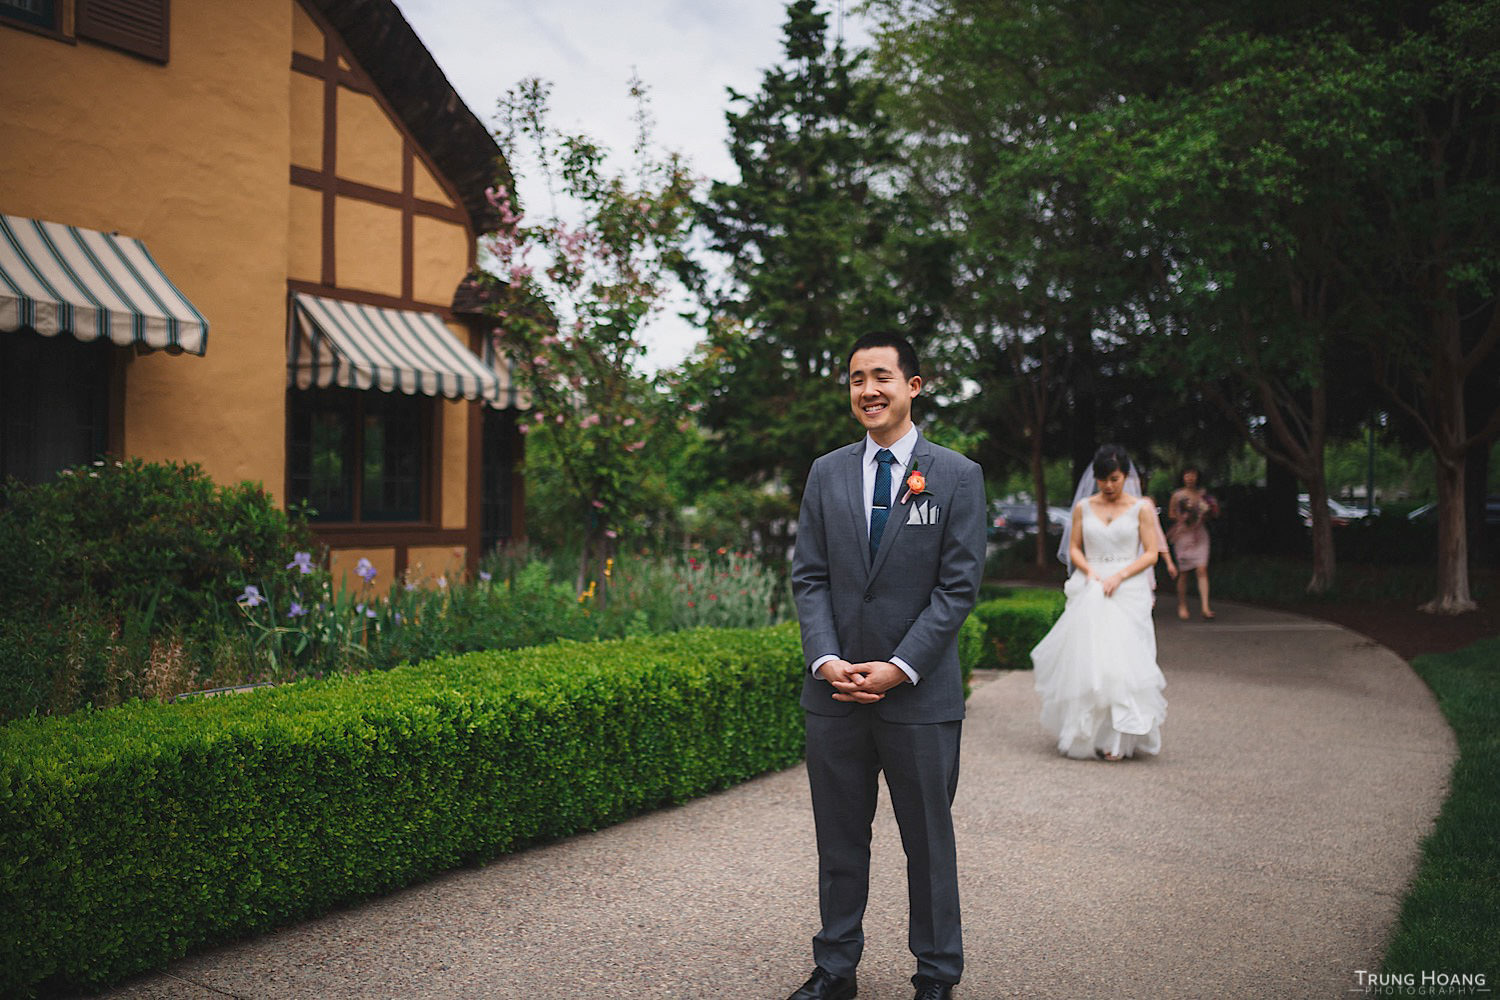  Photo by Trung Hoang Photography |www.trunghoangphotography.com | San Francisco Bay Area Wedding Photographer 